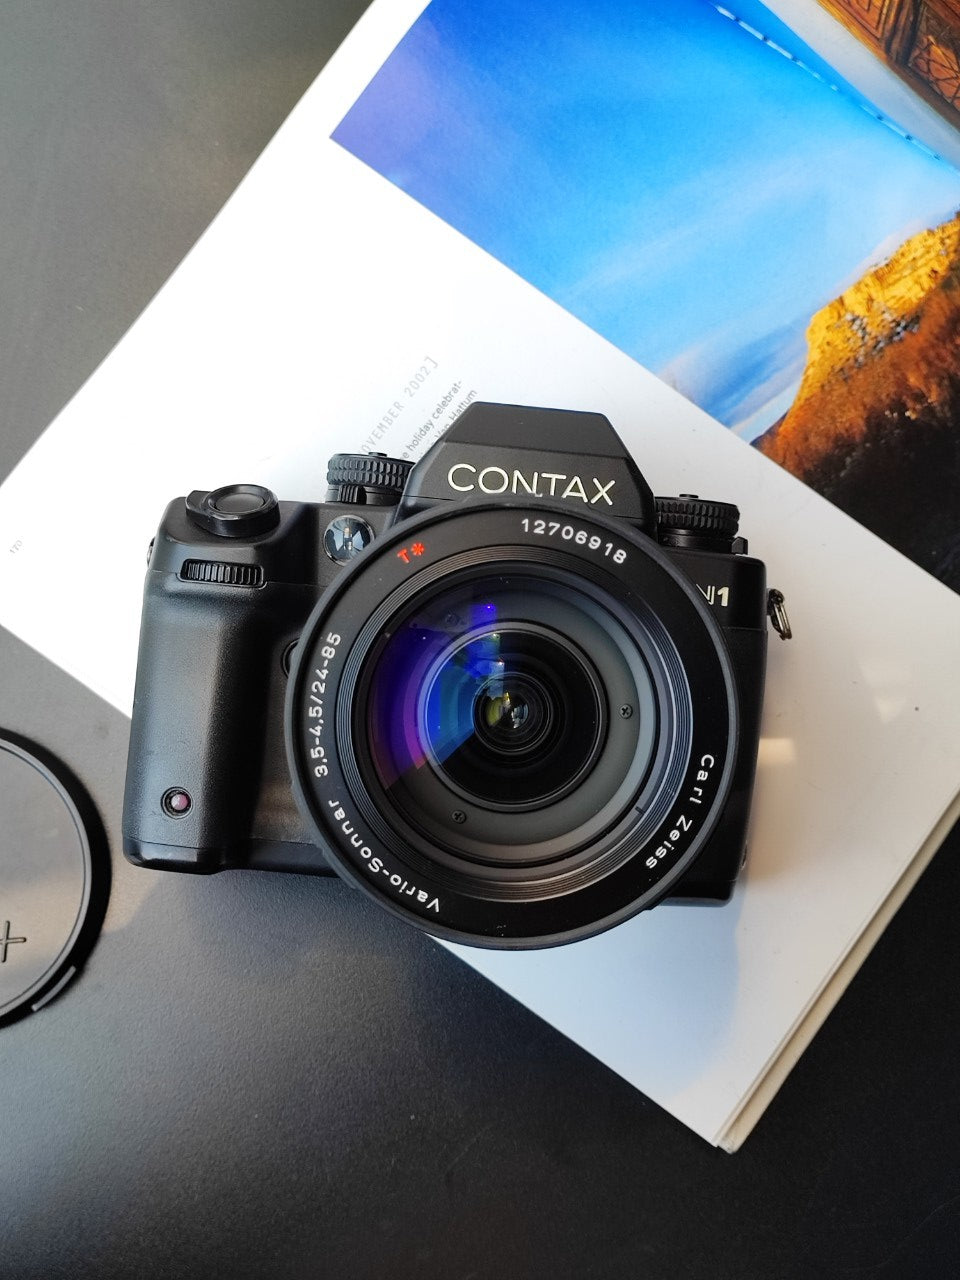 Contax N1 with Carl Zeiss Vario-Sonnar 24-85mm 1:3.5-4.5